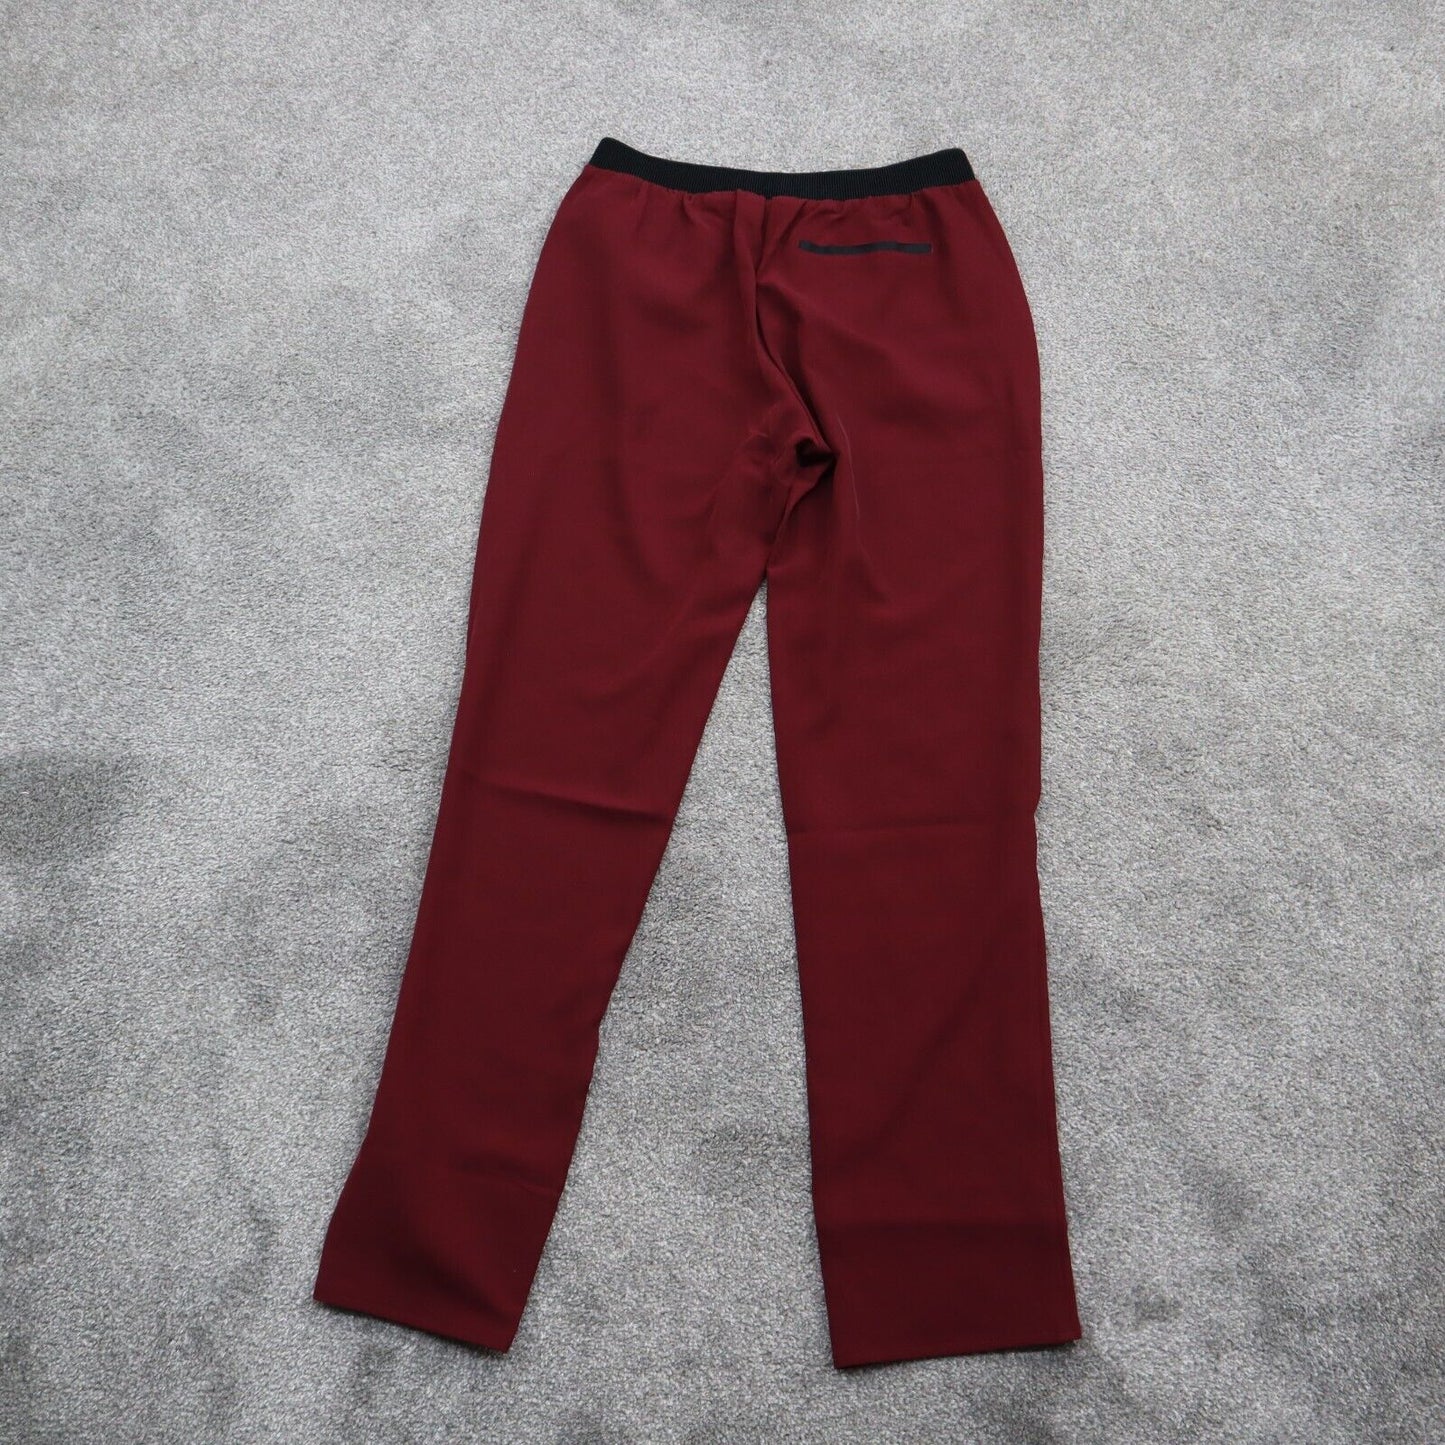 NWT Forever 21 Womens Ankle Skinny Pant Stretch Waist Pockets Maroon Size Medium